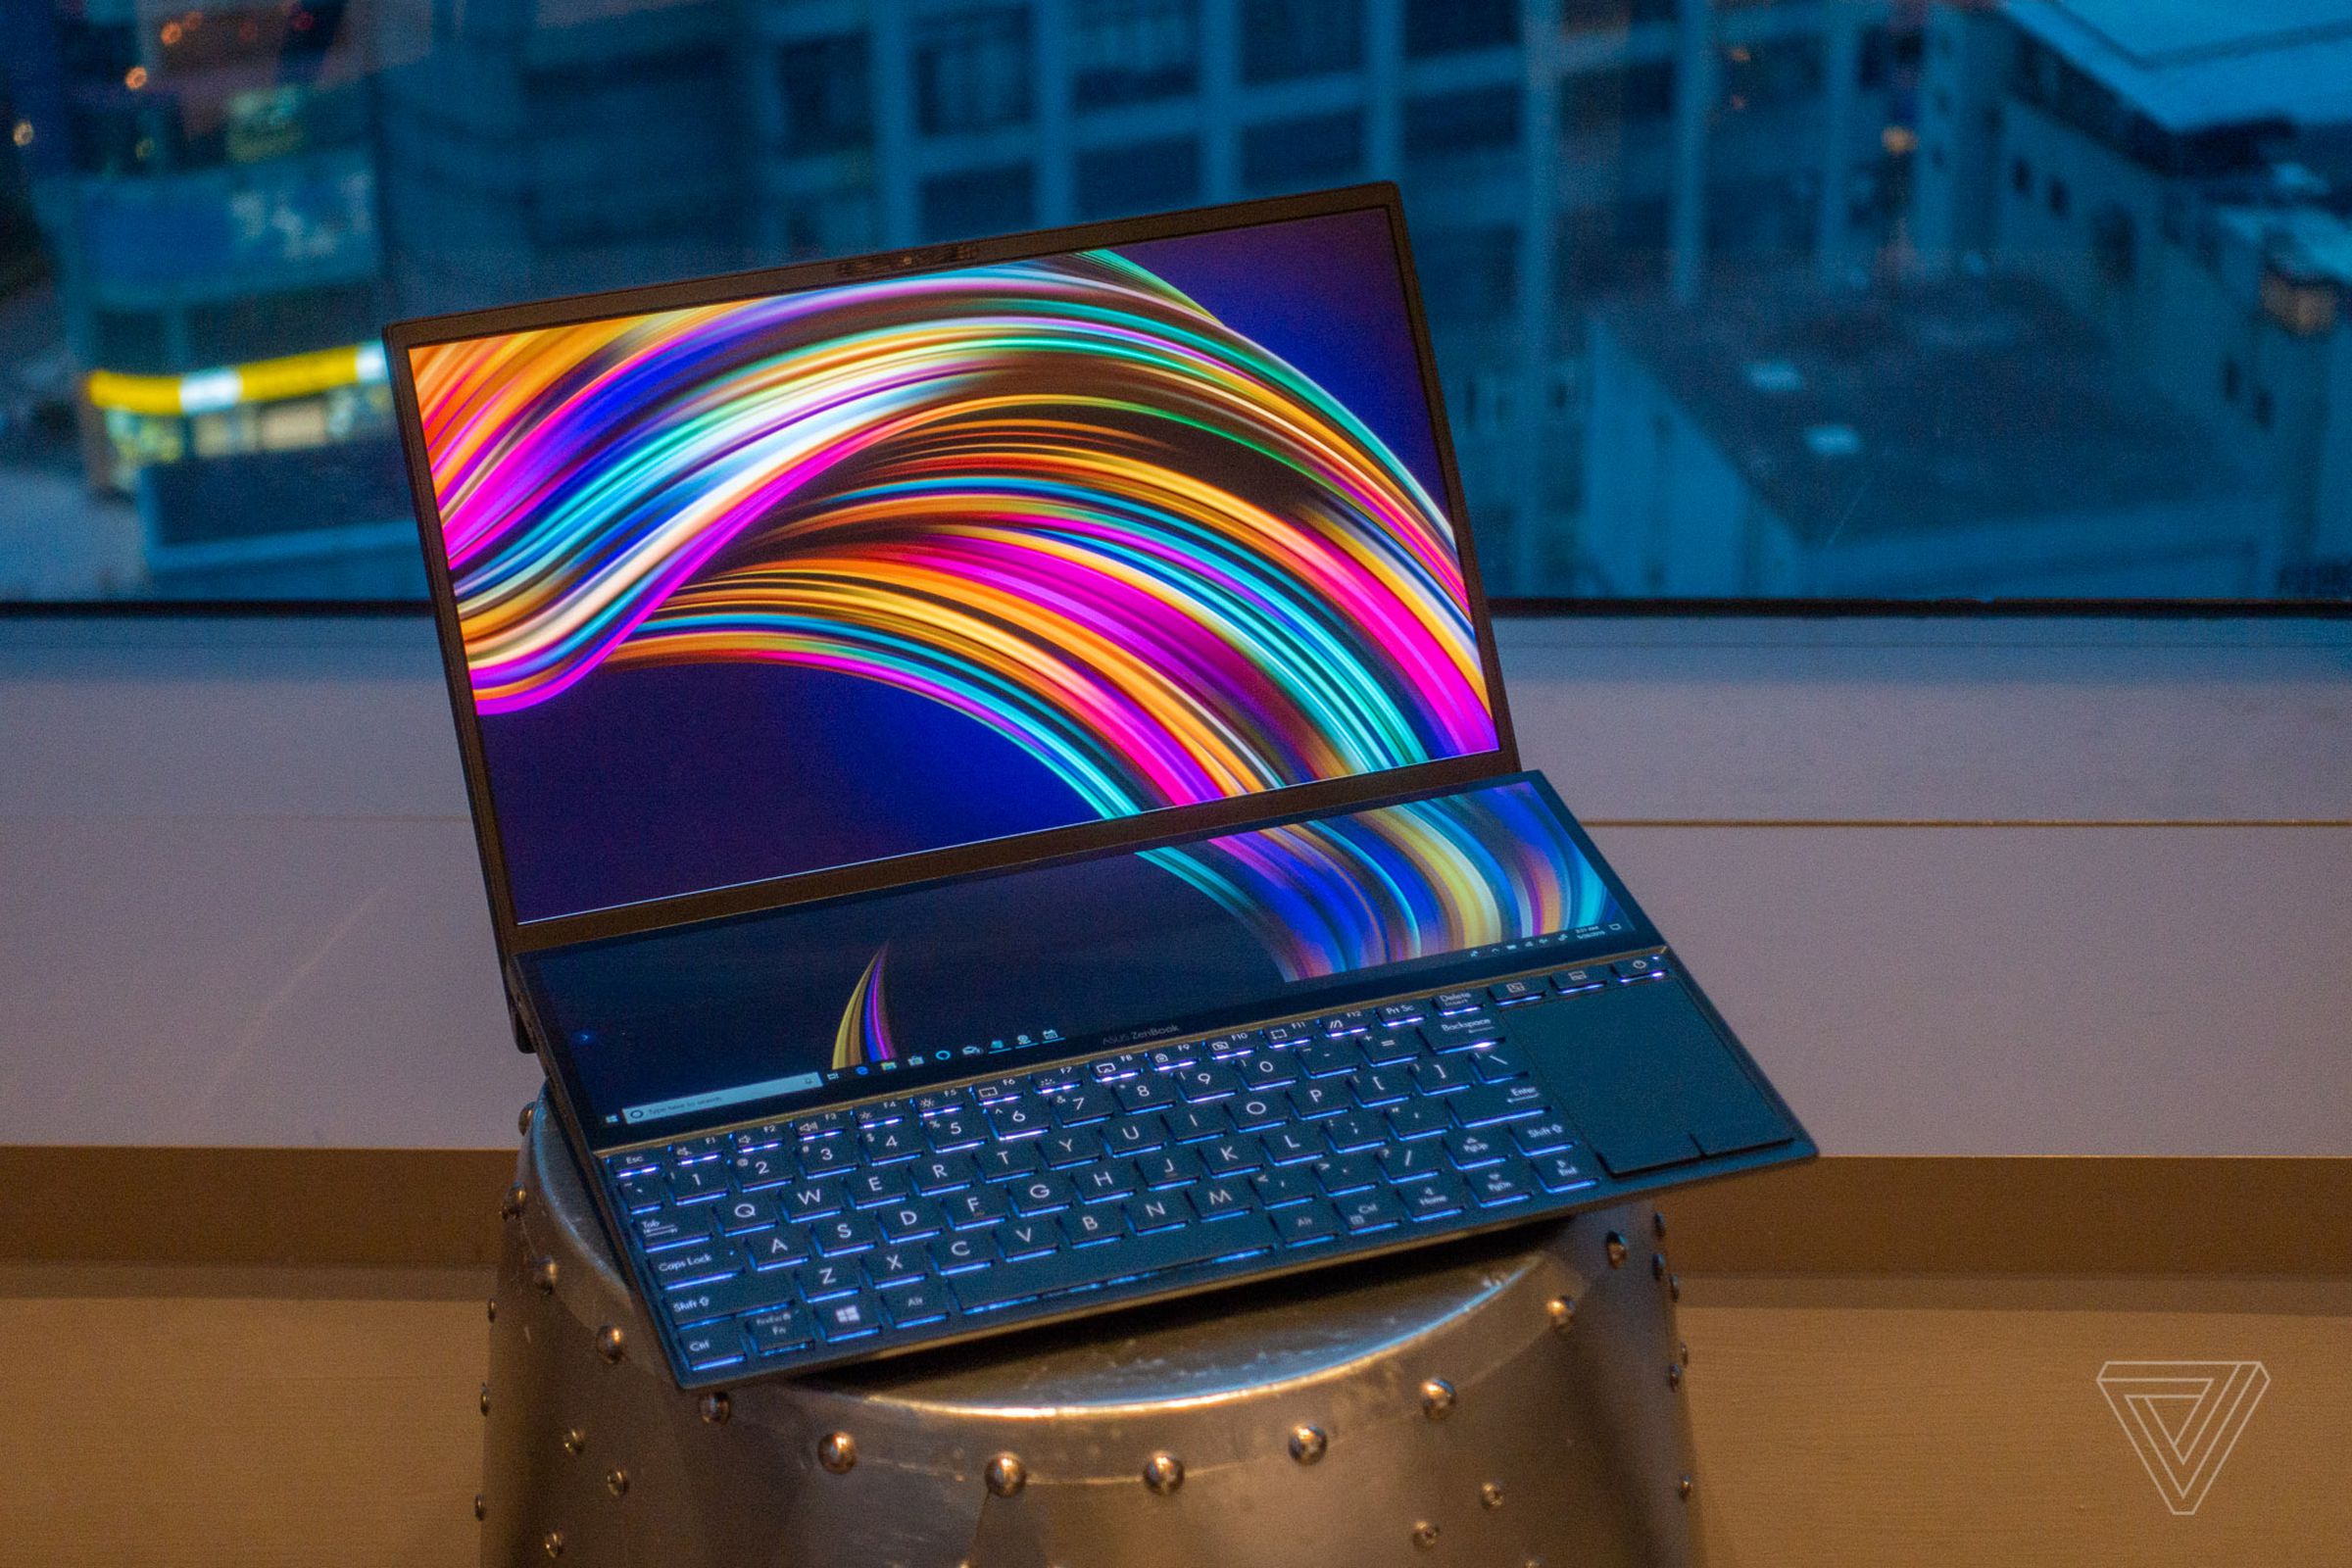 The Asus ZenBook Pro Duo has a second screen above its keyboard.